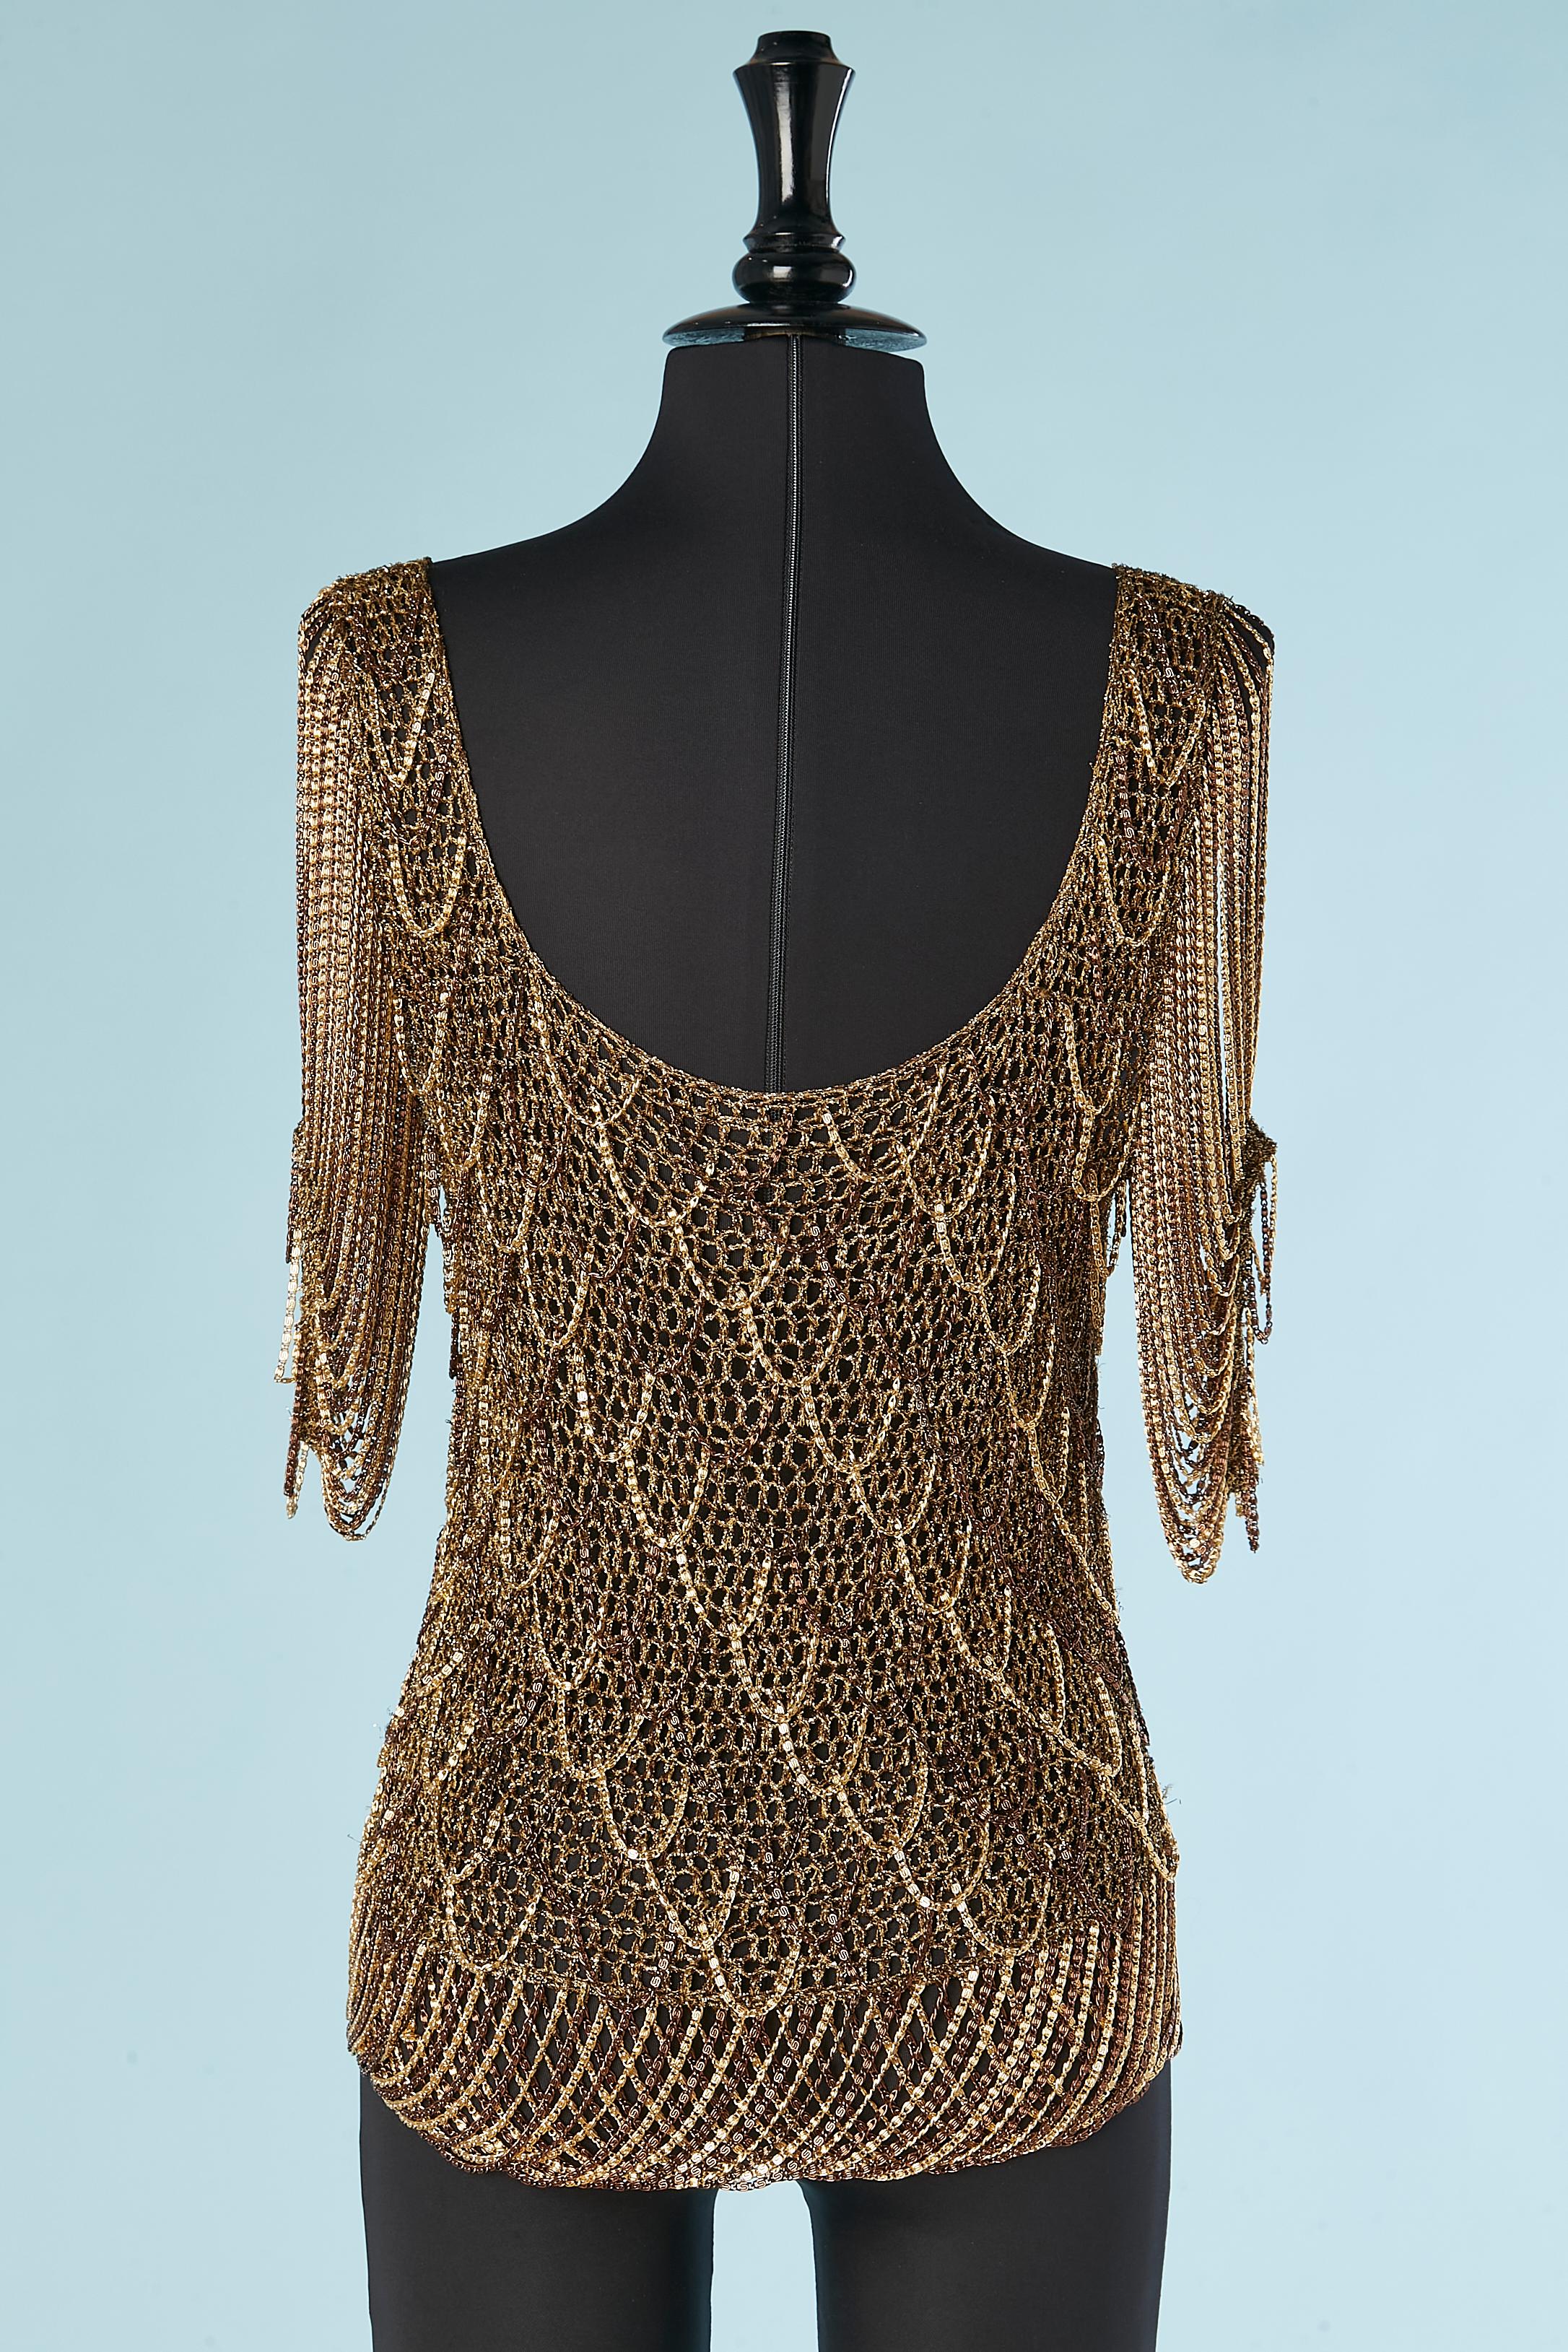 Woven gold and copper tone chain and knit sweater Loris Azzaro 1970's  For Sale 2